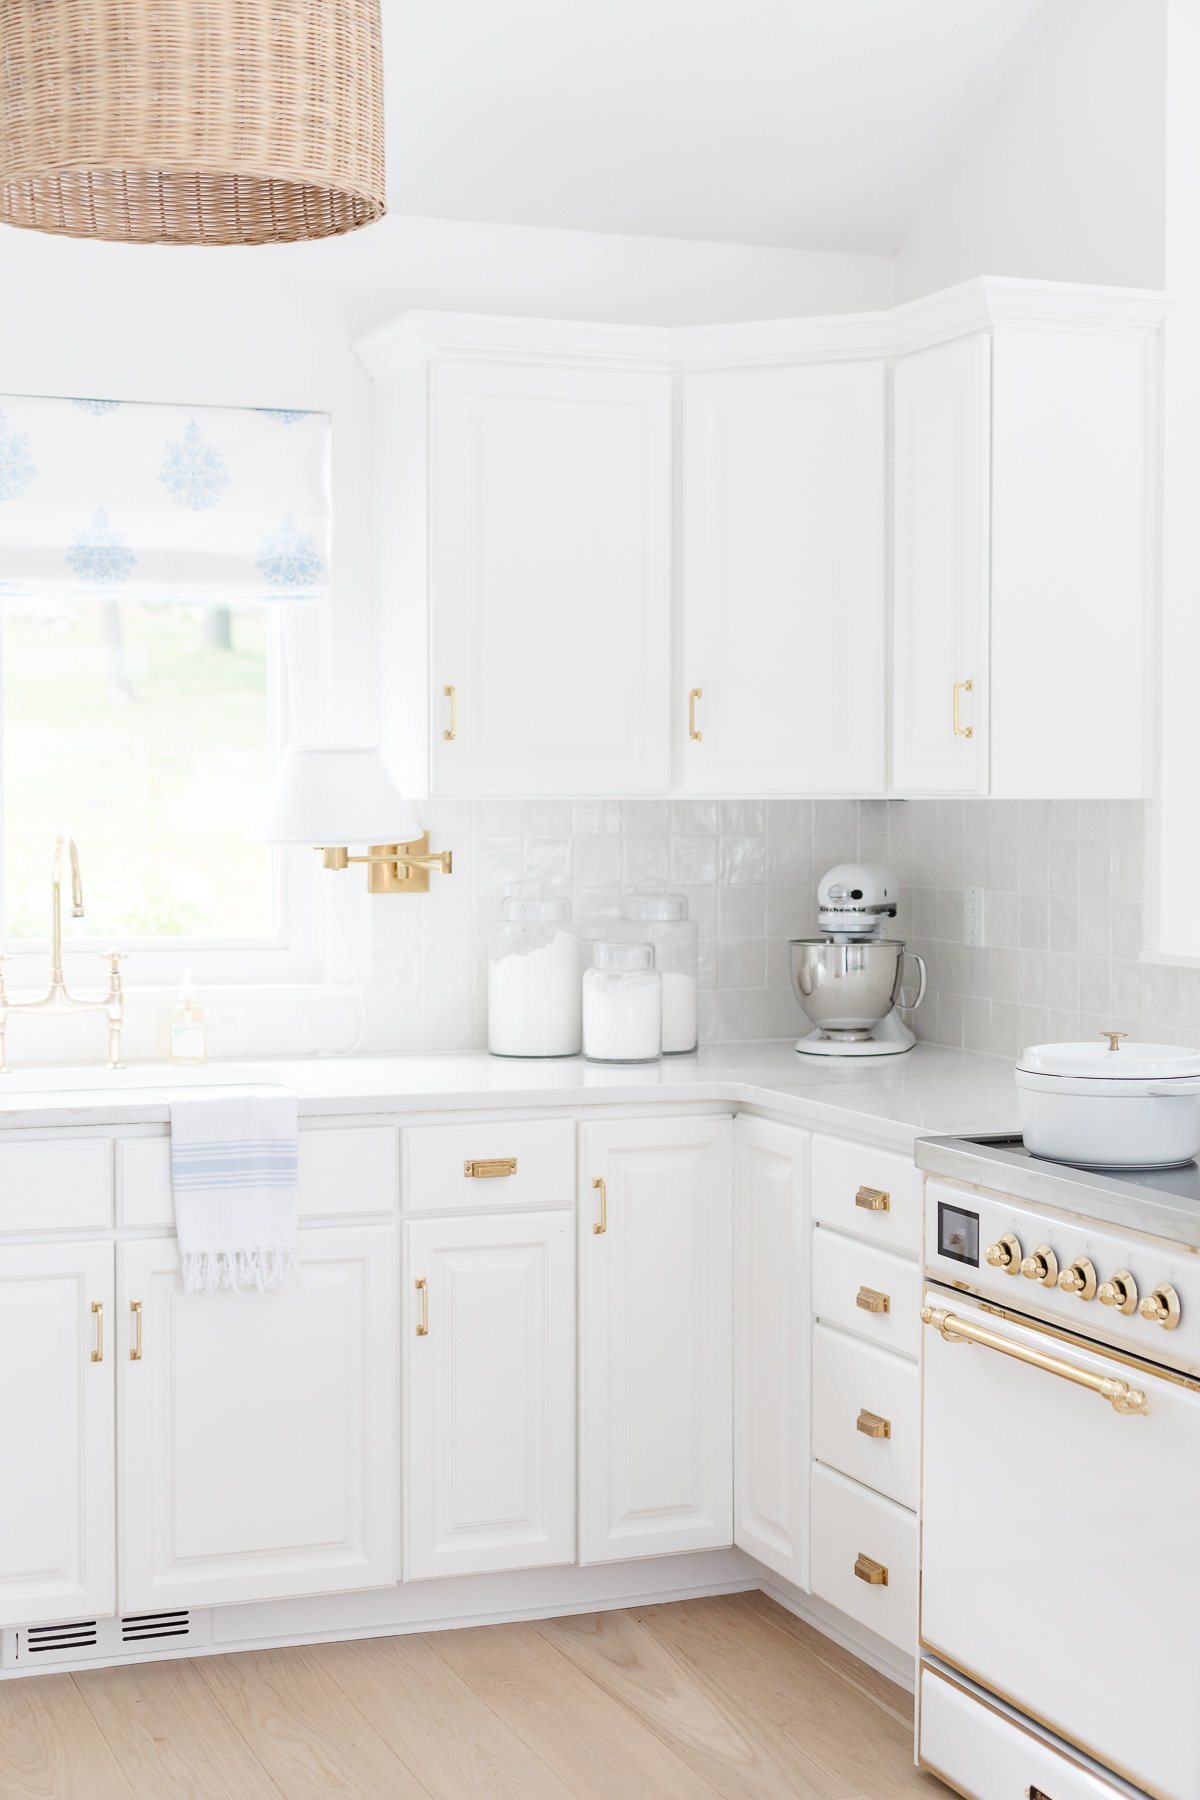 A kitchen painted Benjamin Moore Simply White.